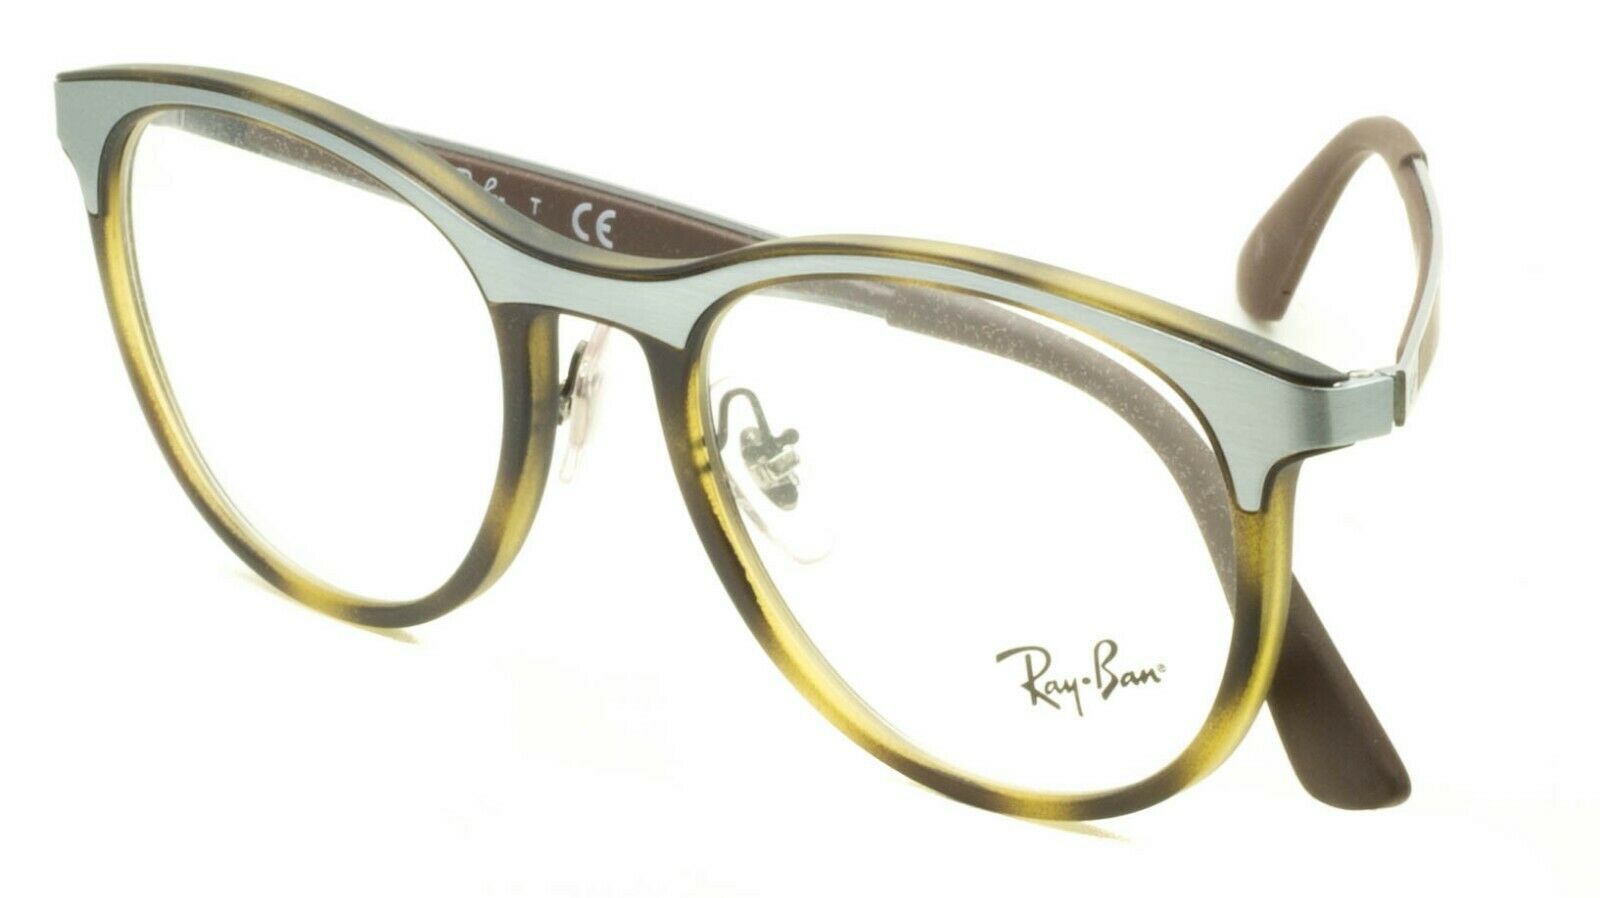 RAY BAN RB 7116 8016 51mm FRAMES RAYBAN Glasses Eyewear RX Optical New - TRUSTED